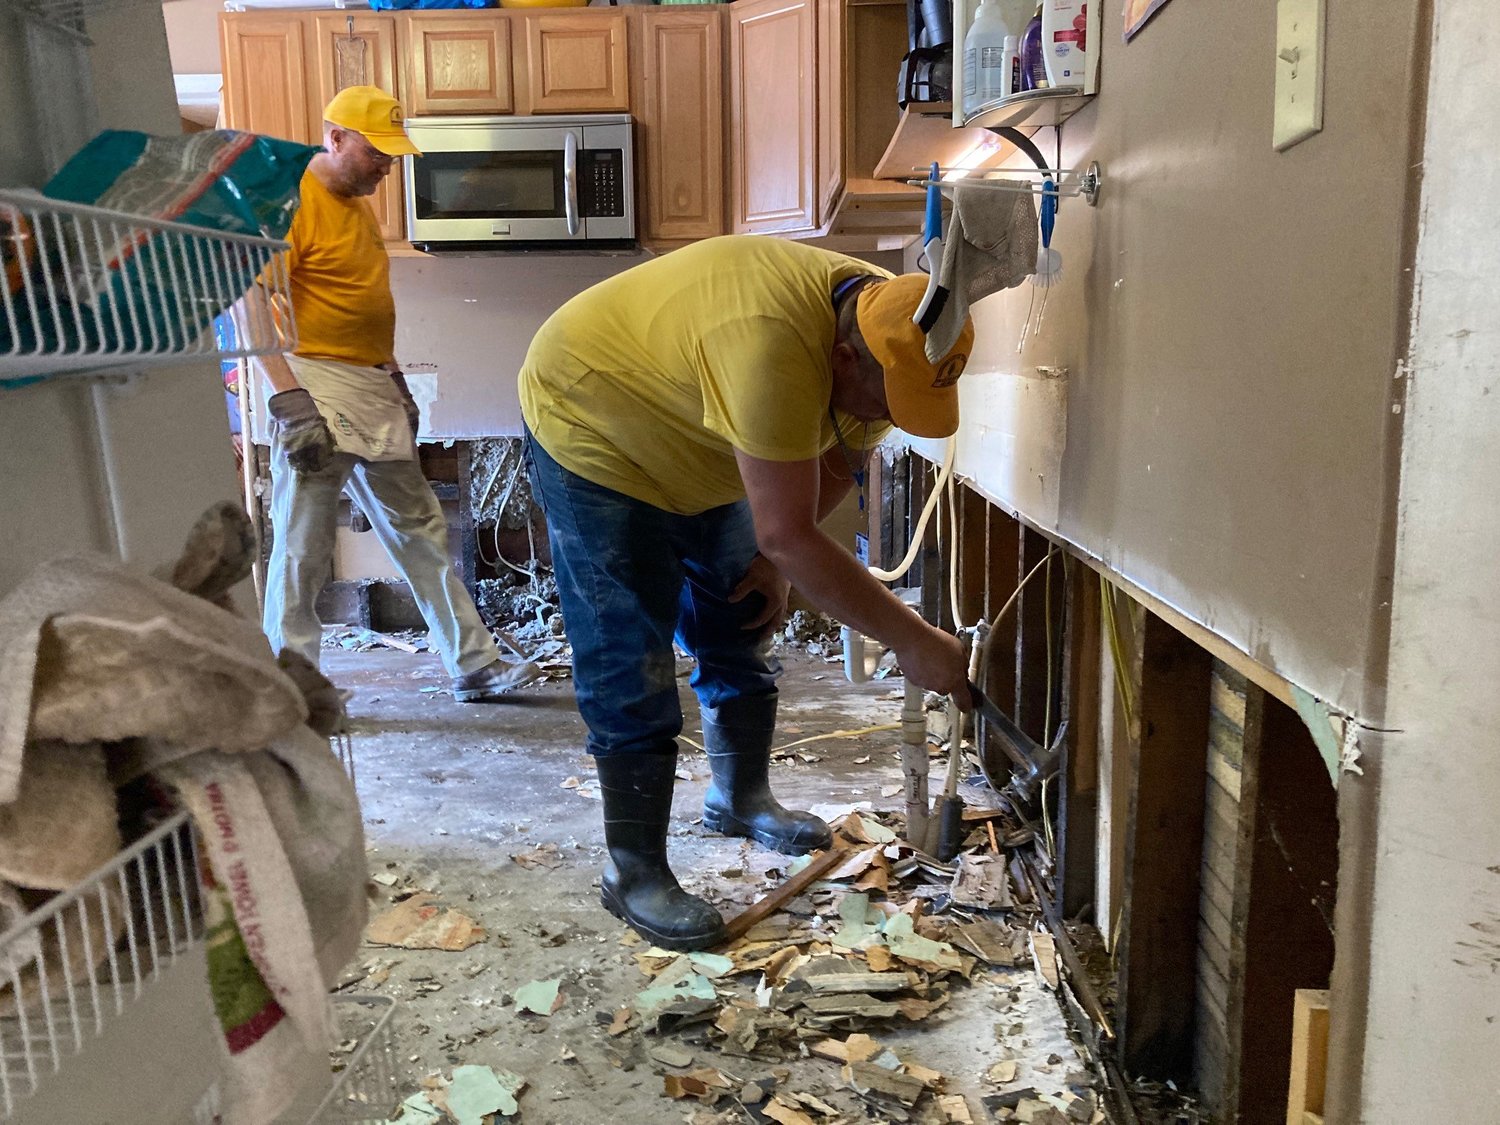 Georgia Baptist Disaster Relief workers remove soggy drywall from a home in eastern Kentucky on Wednesday, August 3, 2022.